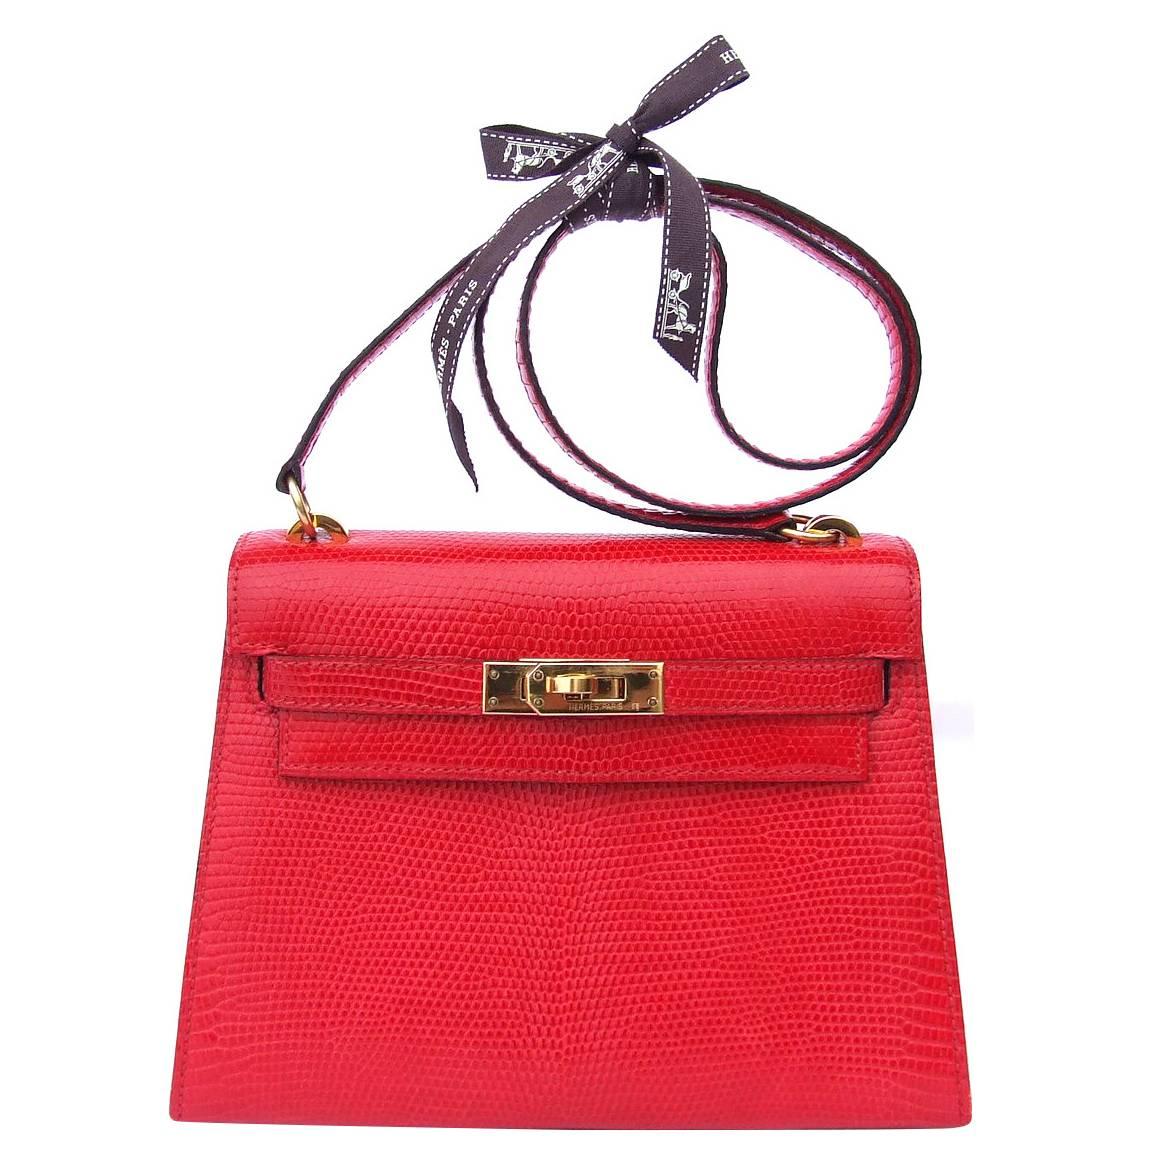 Exceptionnal and Rare Hermes Mini Kelly Bag 20 cm 2 ways Red Lizard Gold Hdw